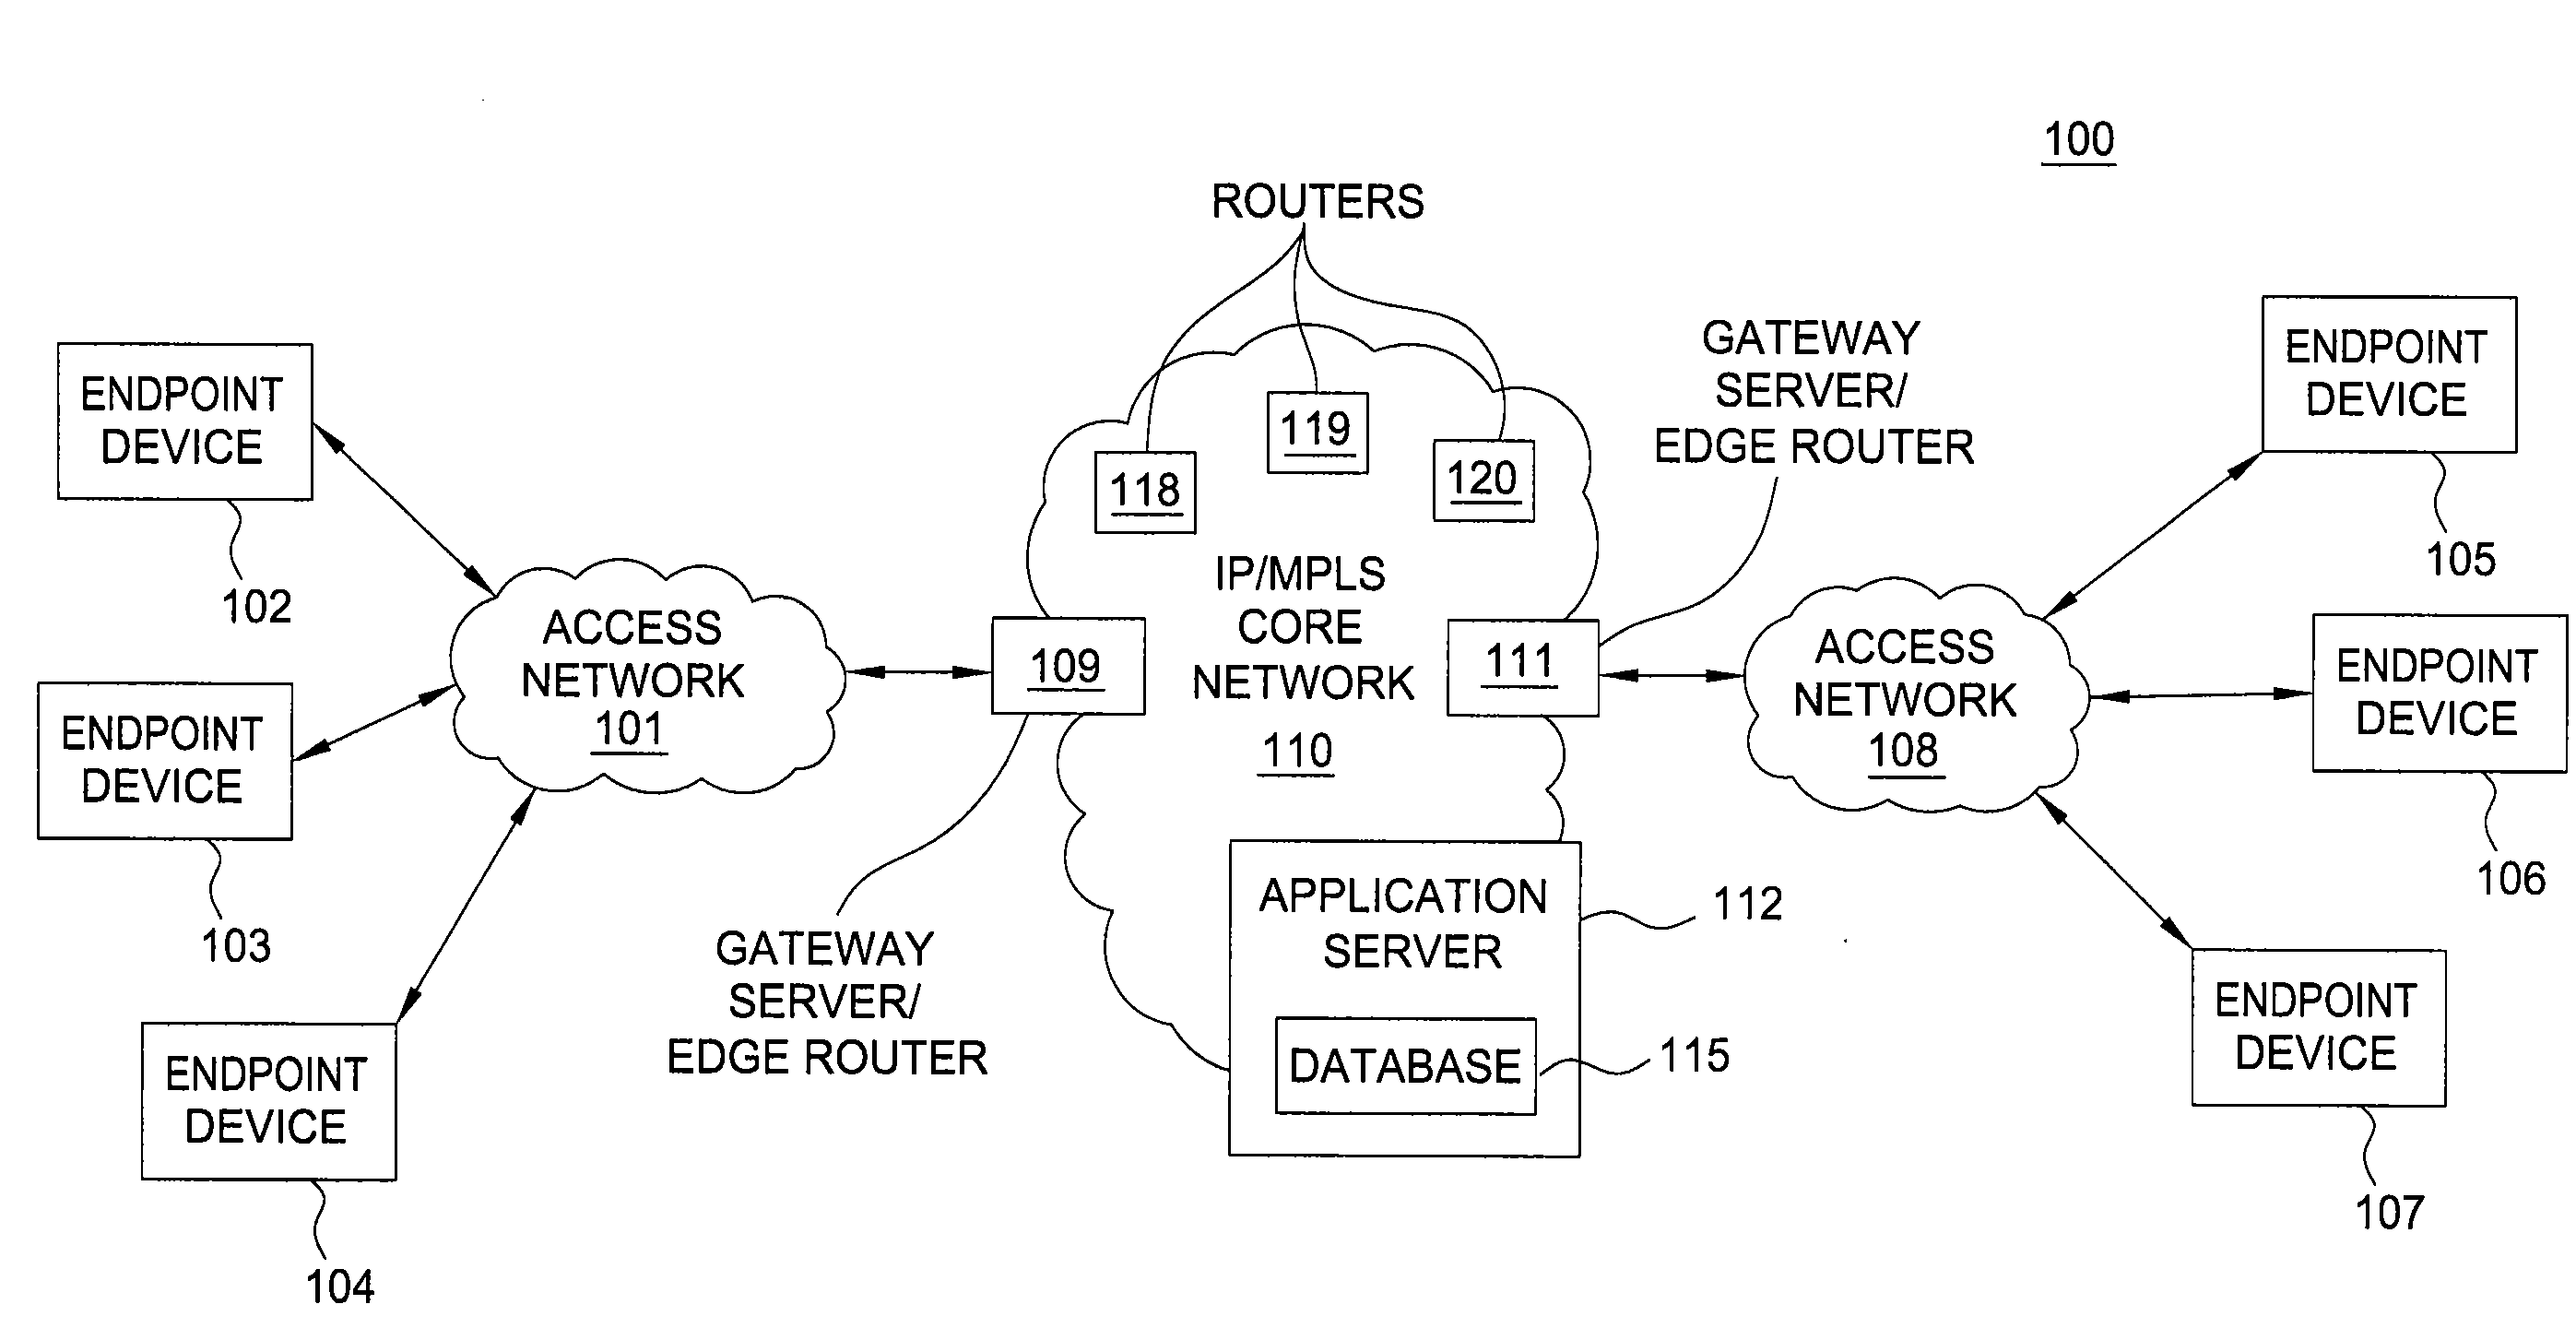 Method and apparatus for providing collaborative viewing of a media stream